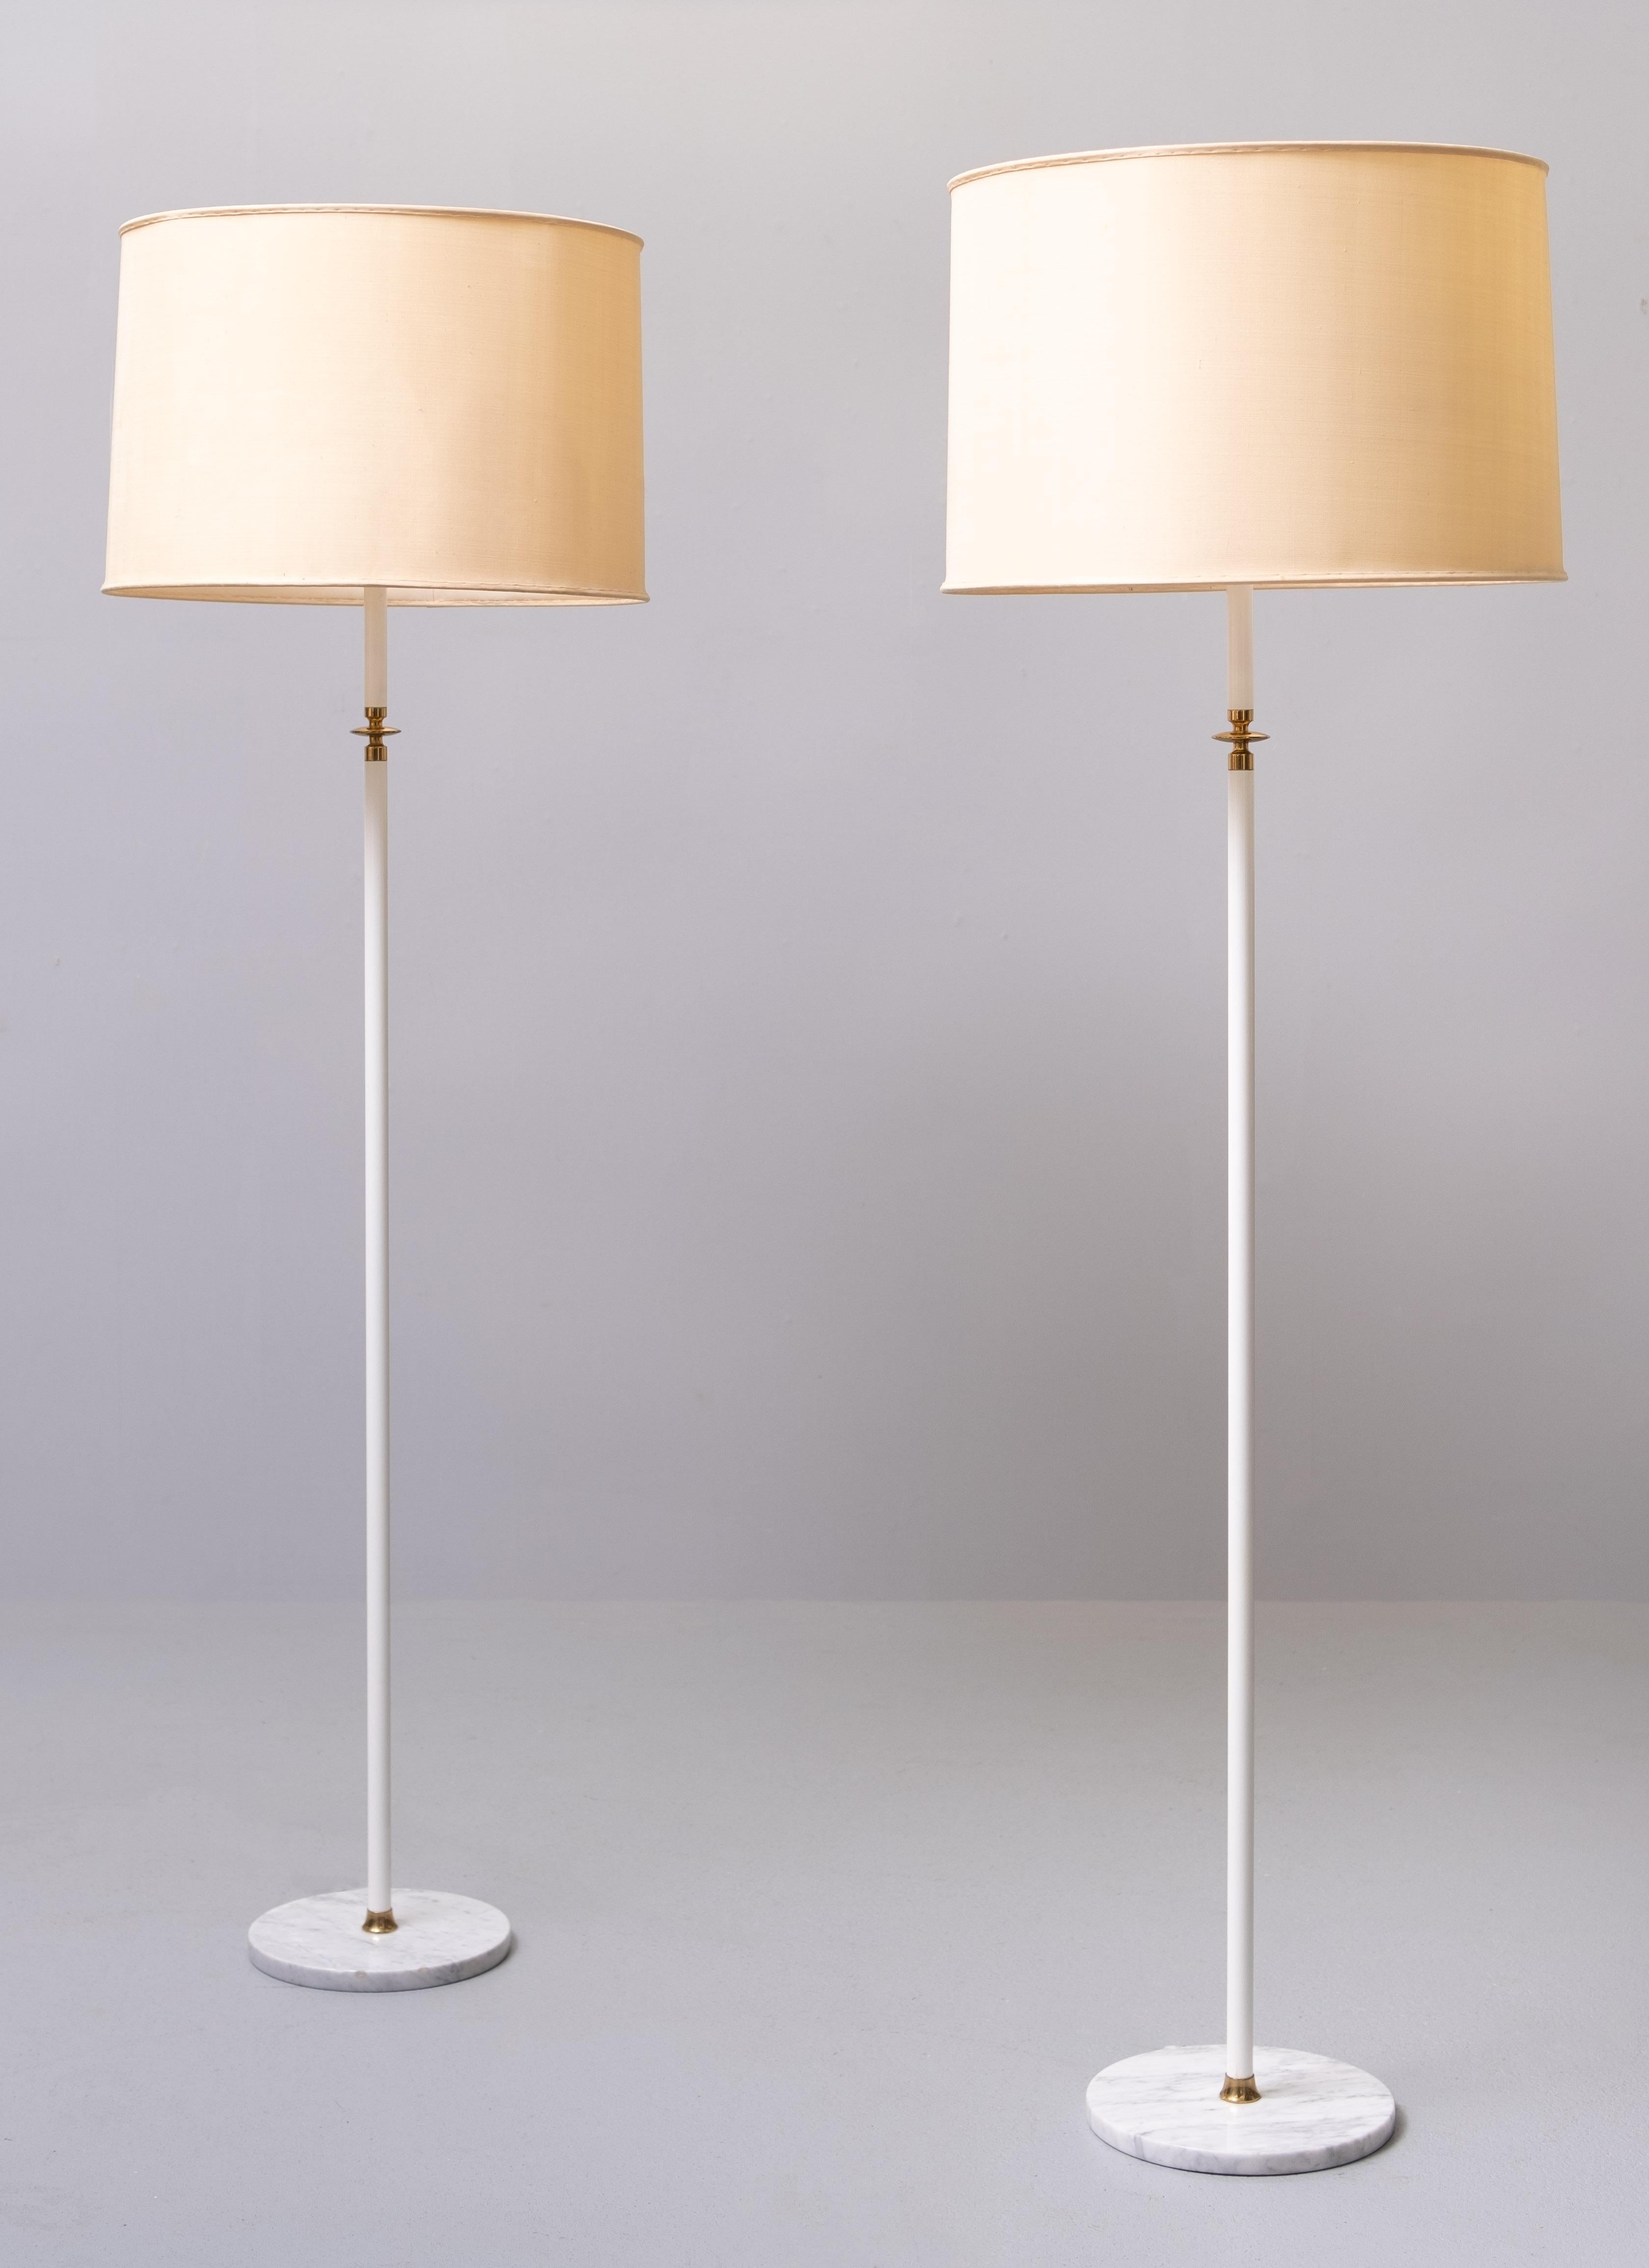 Stunning pair of Floor lamps , all the characteristics of a Arredoluce 
floor lamps .white Enameled upright .Carrara marble base . Brass details .
signed ''Made Italy'' Three large E27 bulbs needed .
can be switch separately .   Super rare and